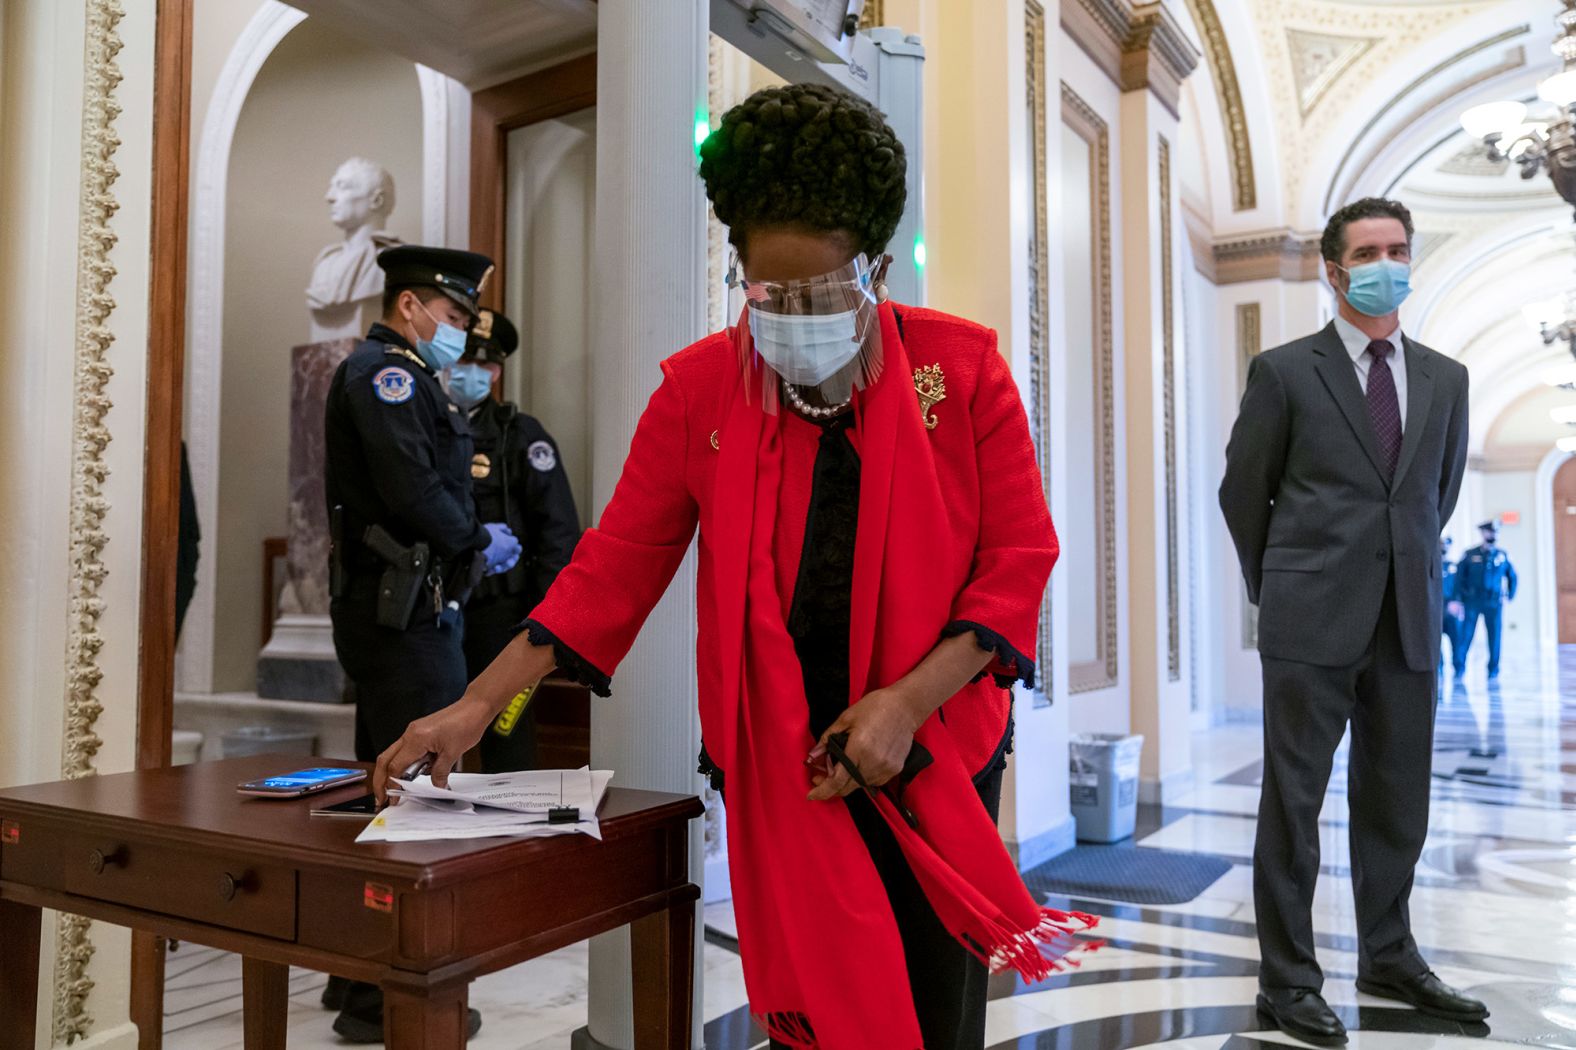 US Rep. Sheila Jackson Lee, a Democrat from Texas, gathers her papers before entering the House chamber on January 13. Members of Congress <a href="index.php?page=&url=https%3A%2F%2Fwww.cnn.com%2F2021%2F01%2F13%2Fpolitics%2Fhouse-floor-metal-detectors%2Findex.html" target="_blank">had to walk through metal detectors</a> in the wake of the Capitol attack.